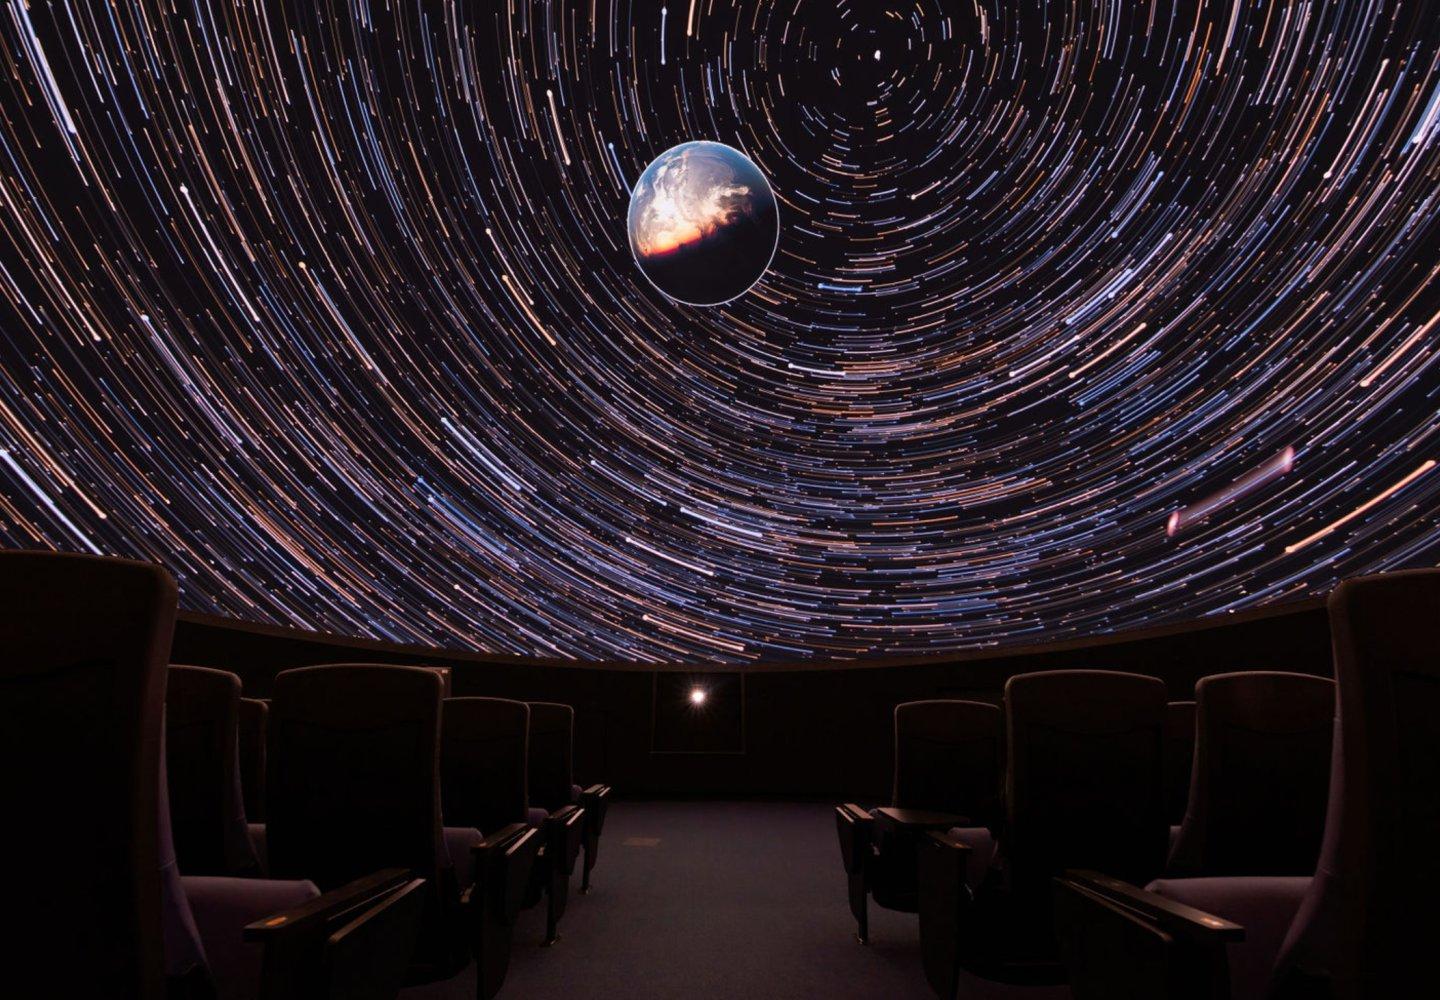 View from inside the planetarium